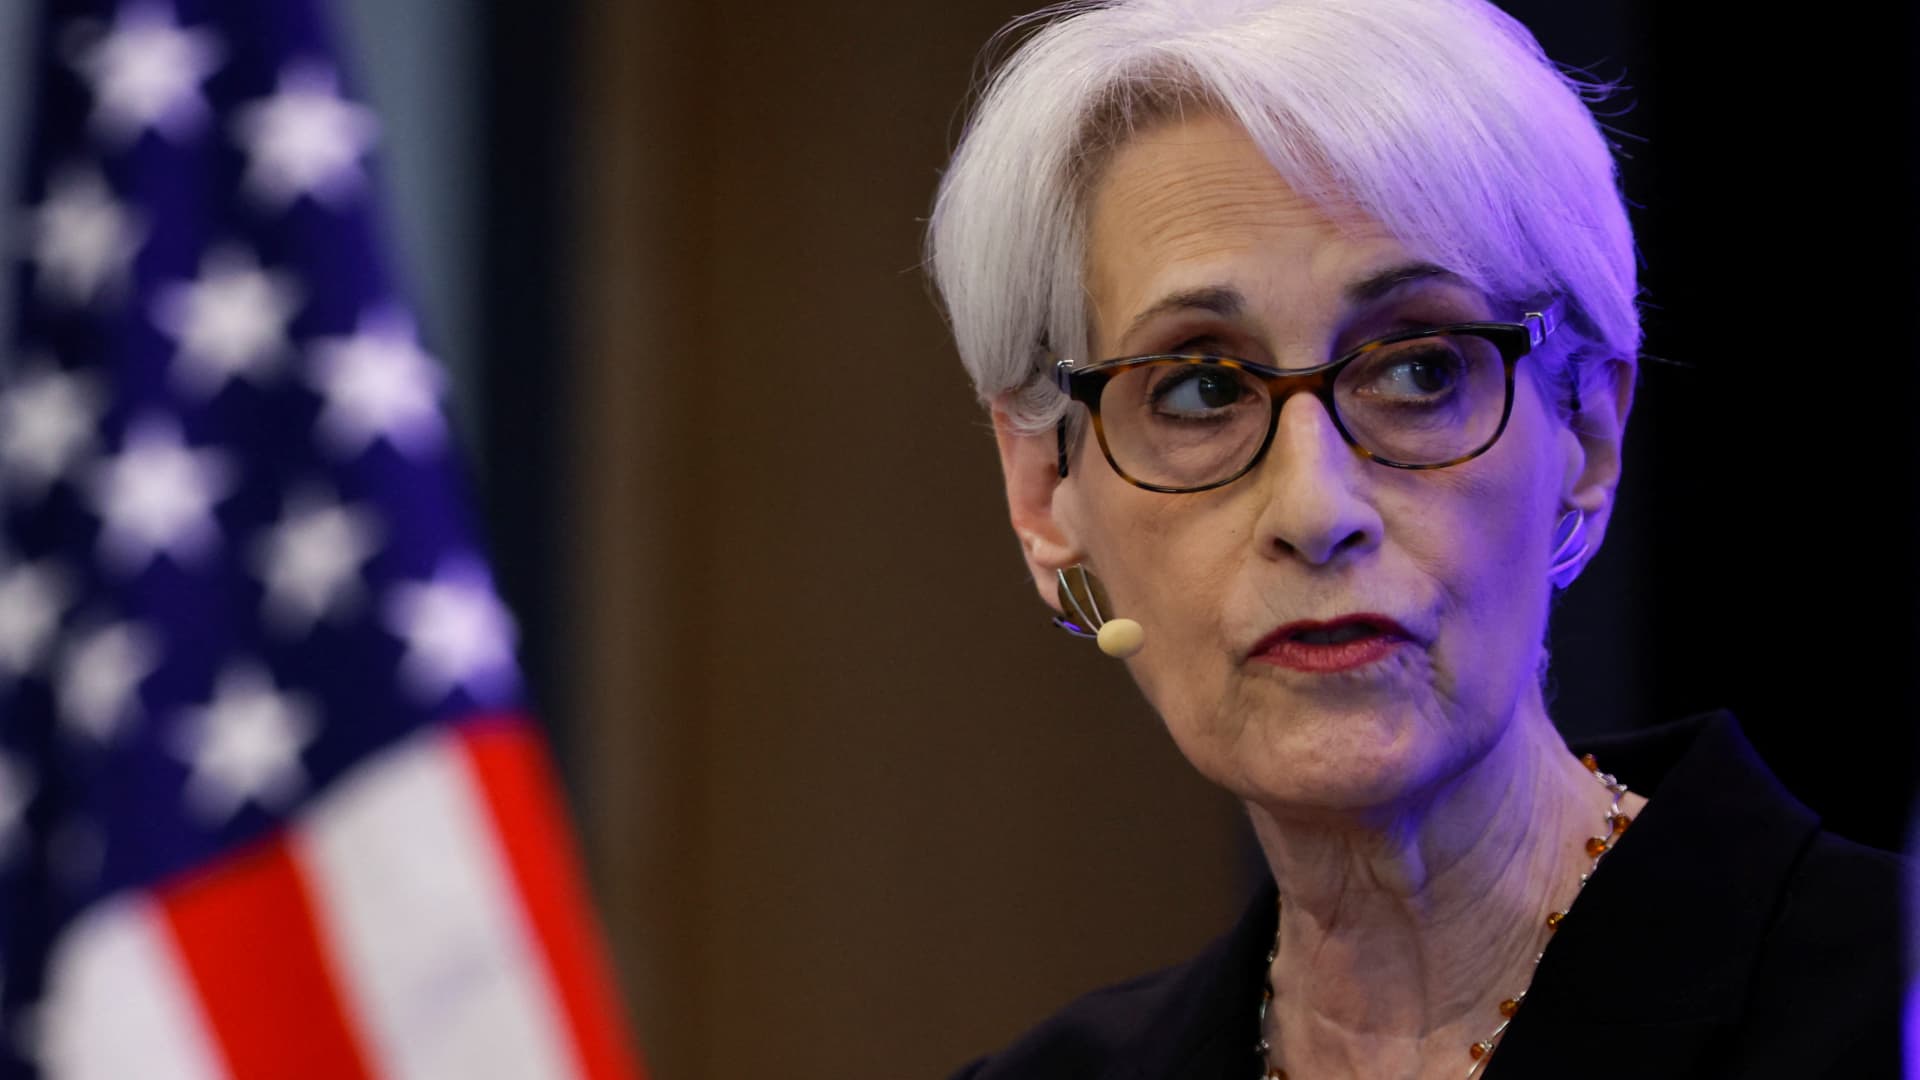 U.S. Deputy Secretary of State Wendy Sherman speaks during a panel with the Friends of Europe in Brussels, Belgium, April 21, 2022.